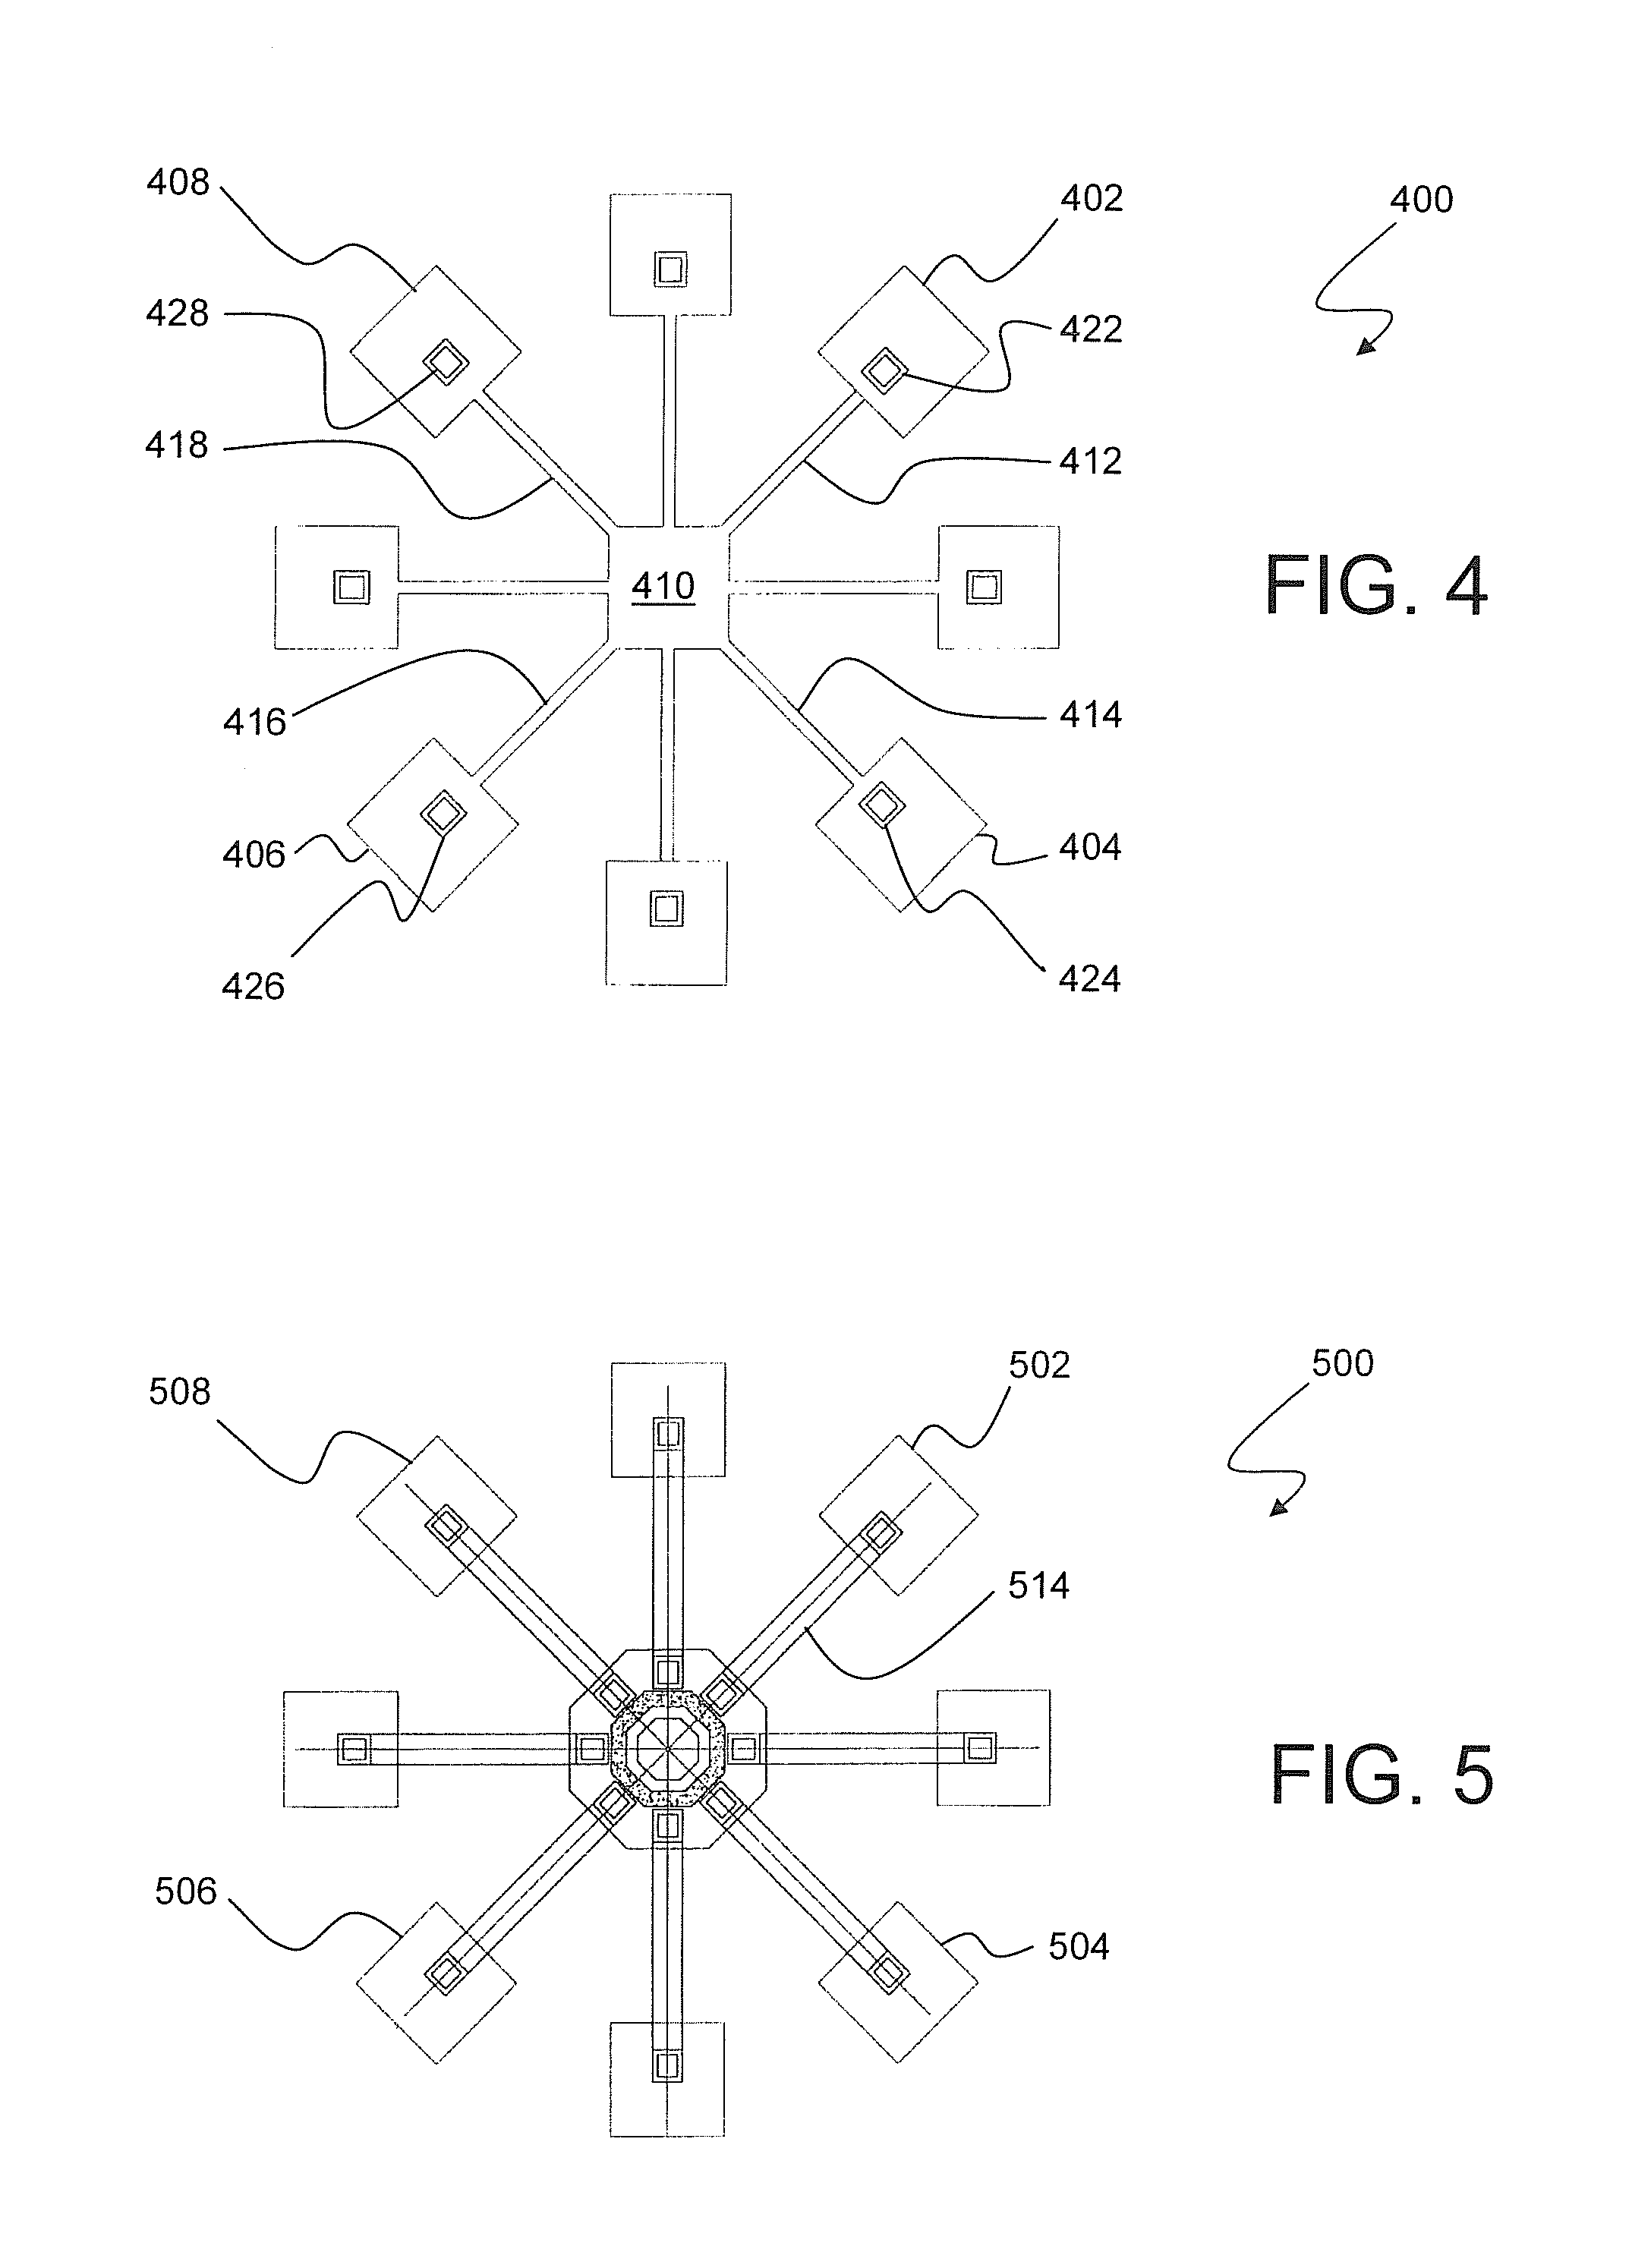 Base support for wind-driven power generators